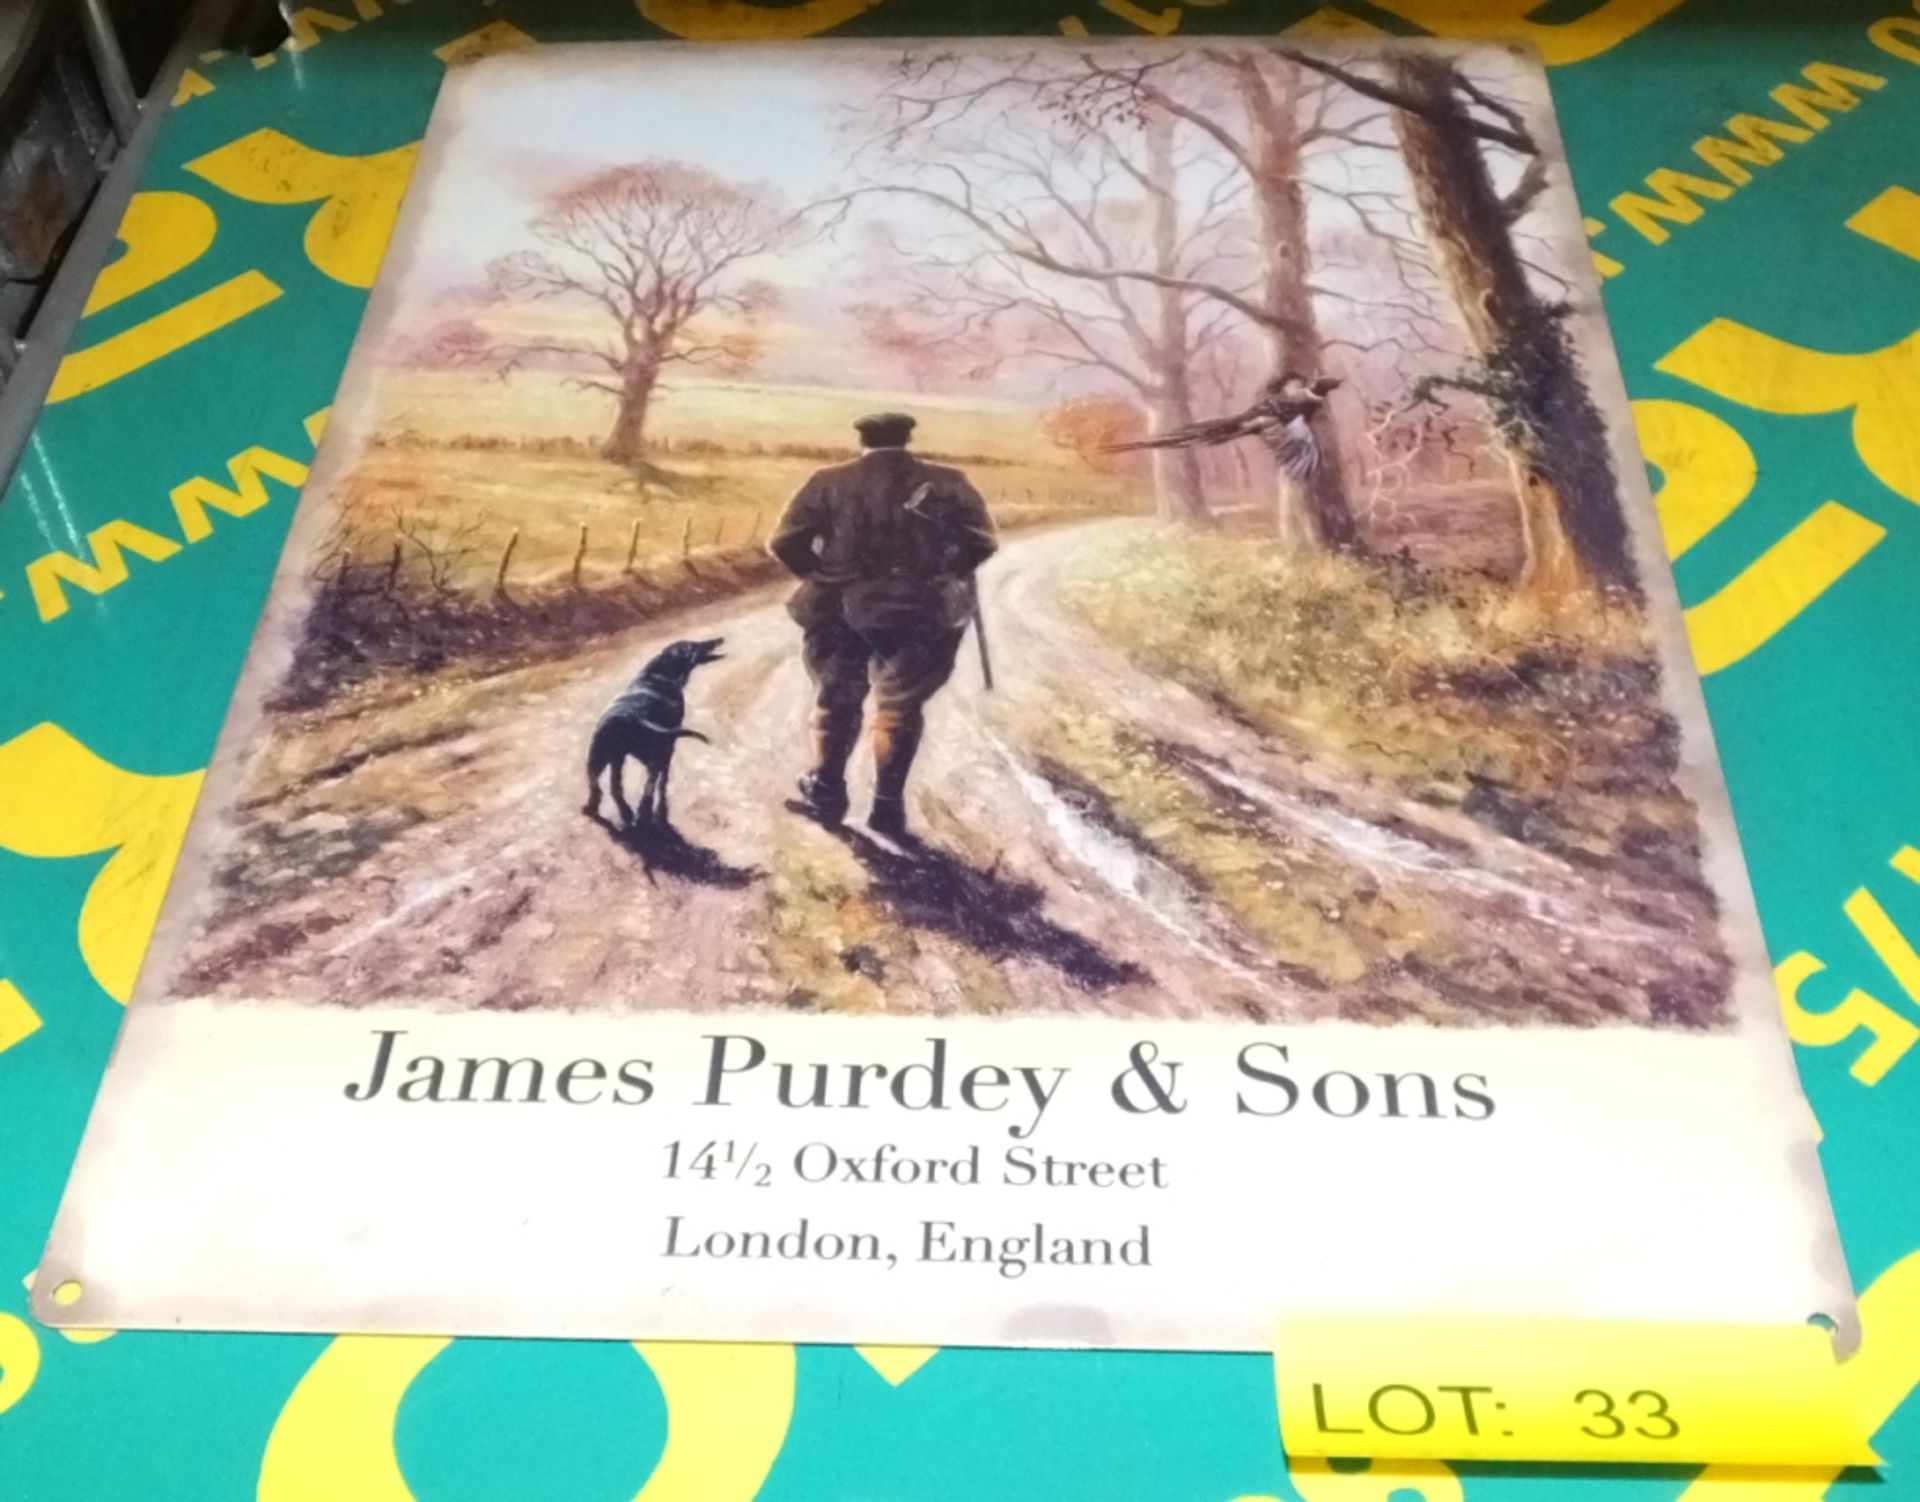 Tin plate sign - James Purdey & Sons